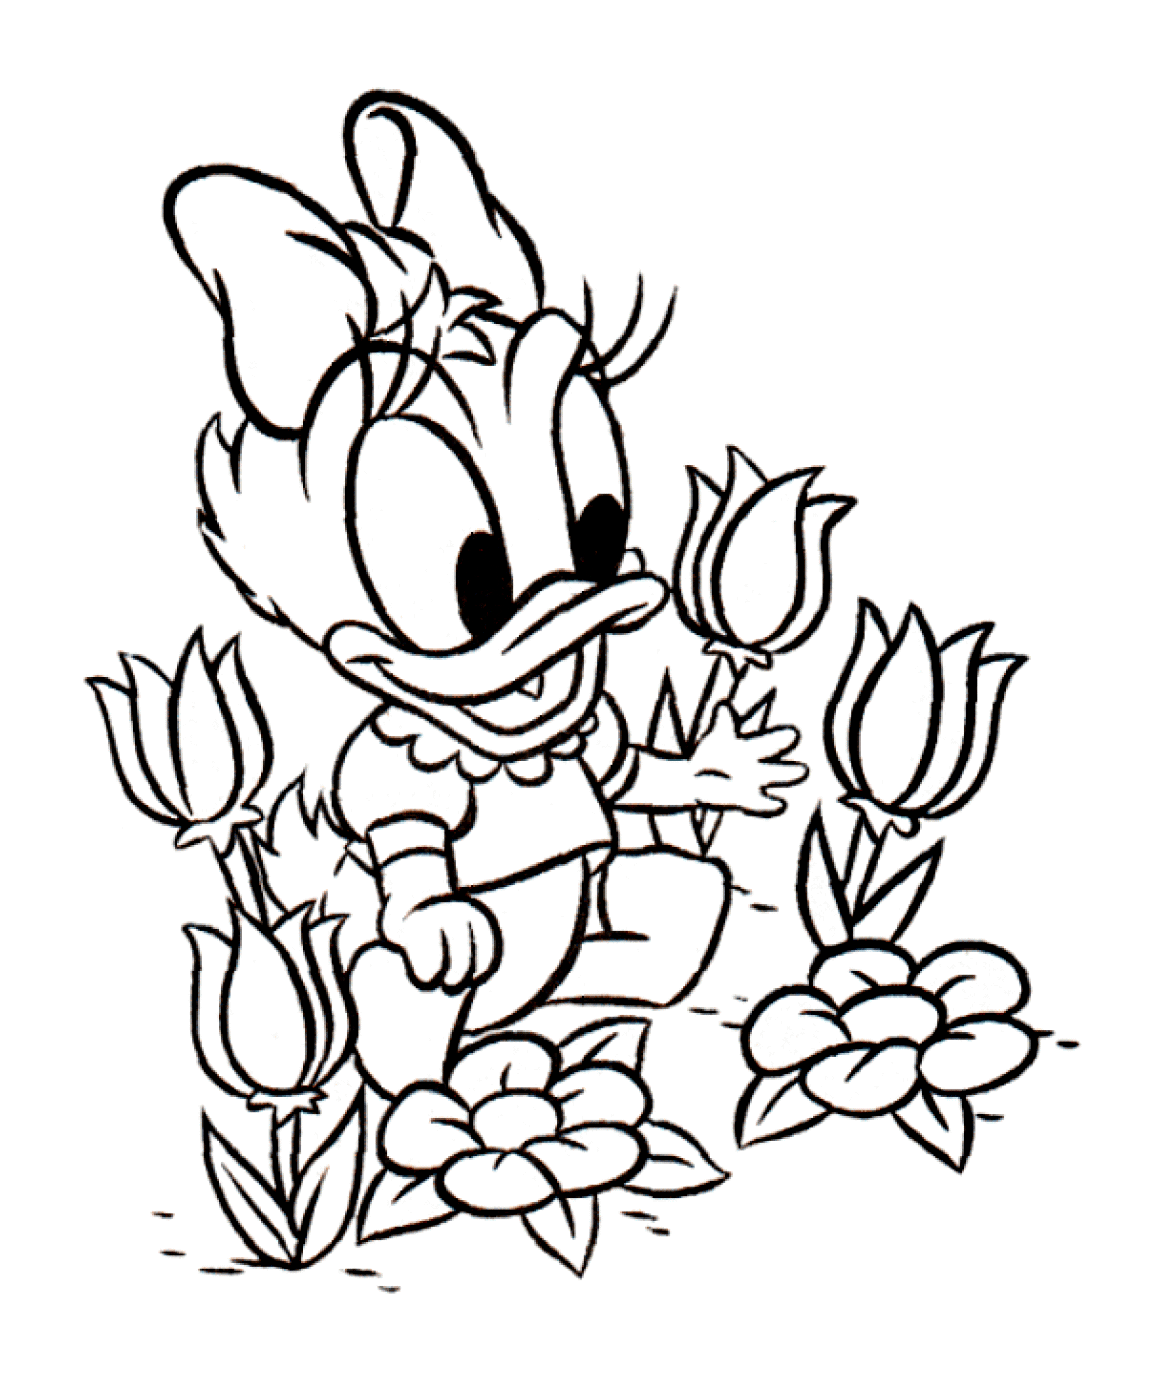 Daisy Free To Color For Kids Daisy Kids Coloring Pages